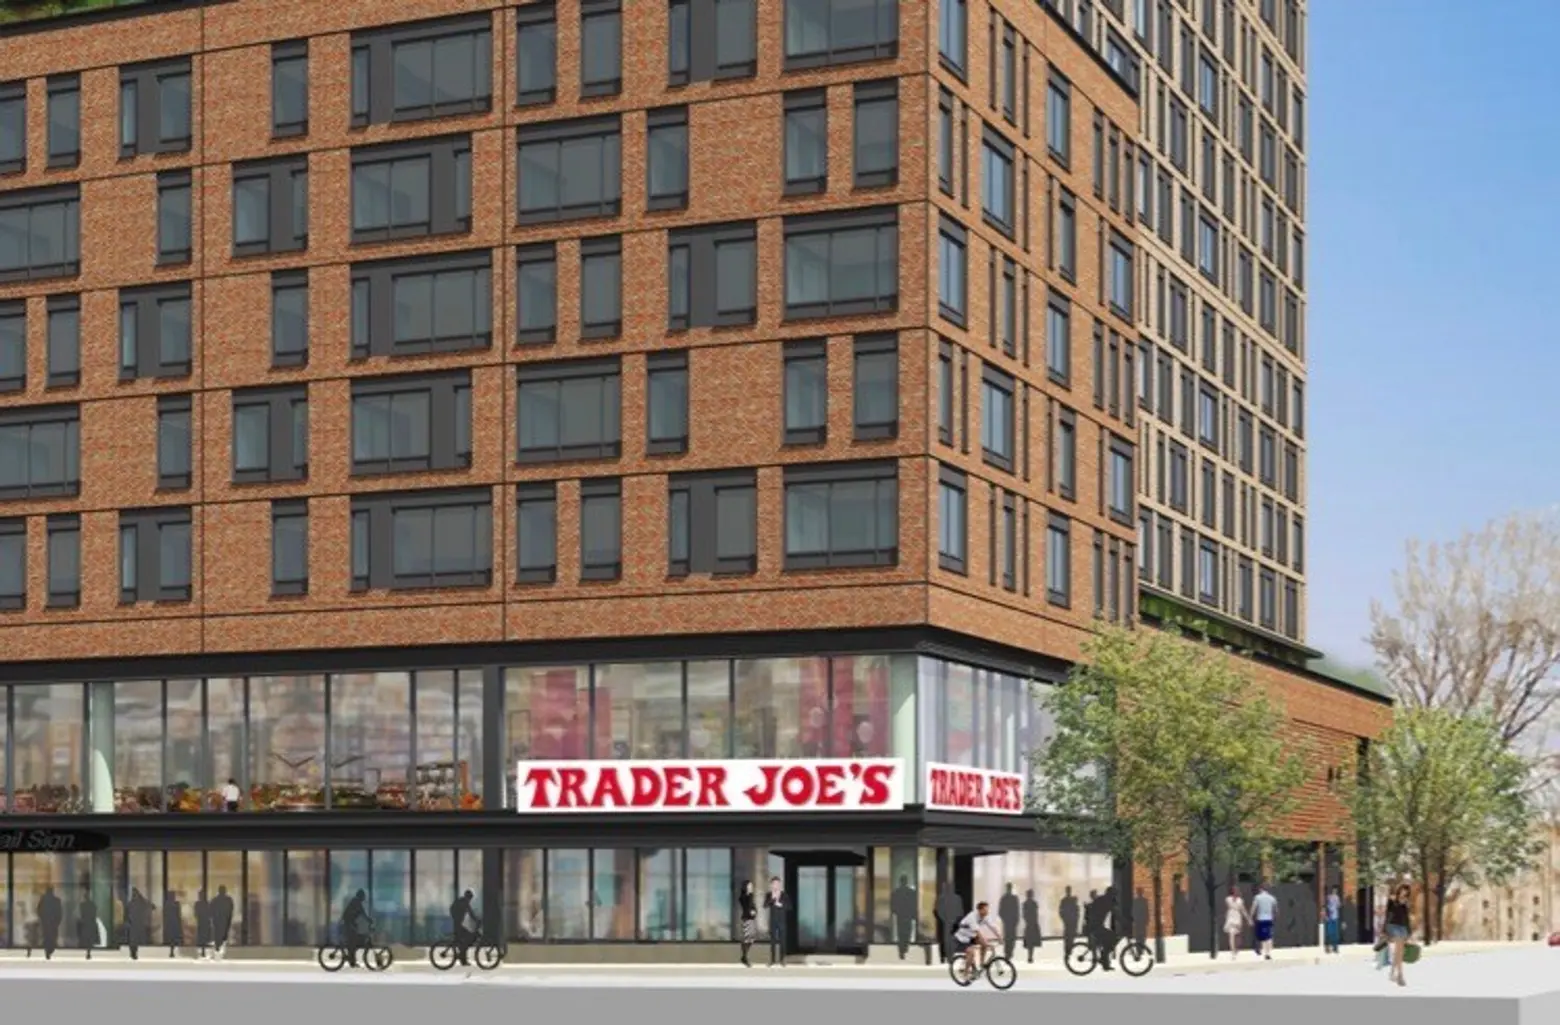 The East Coast’s largest Trader Joe’s opens at Essex Crossing